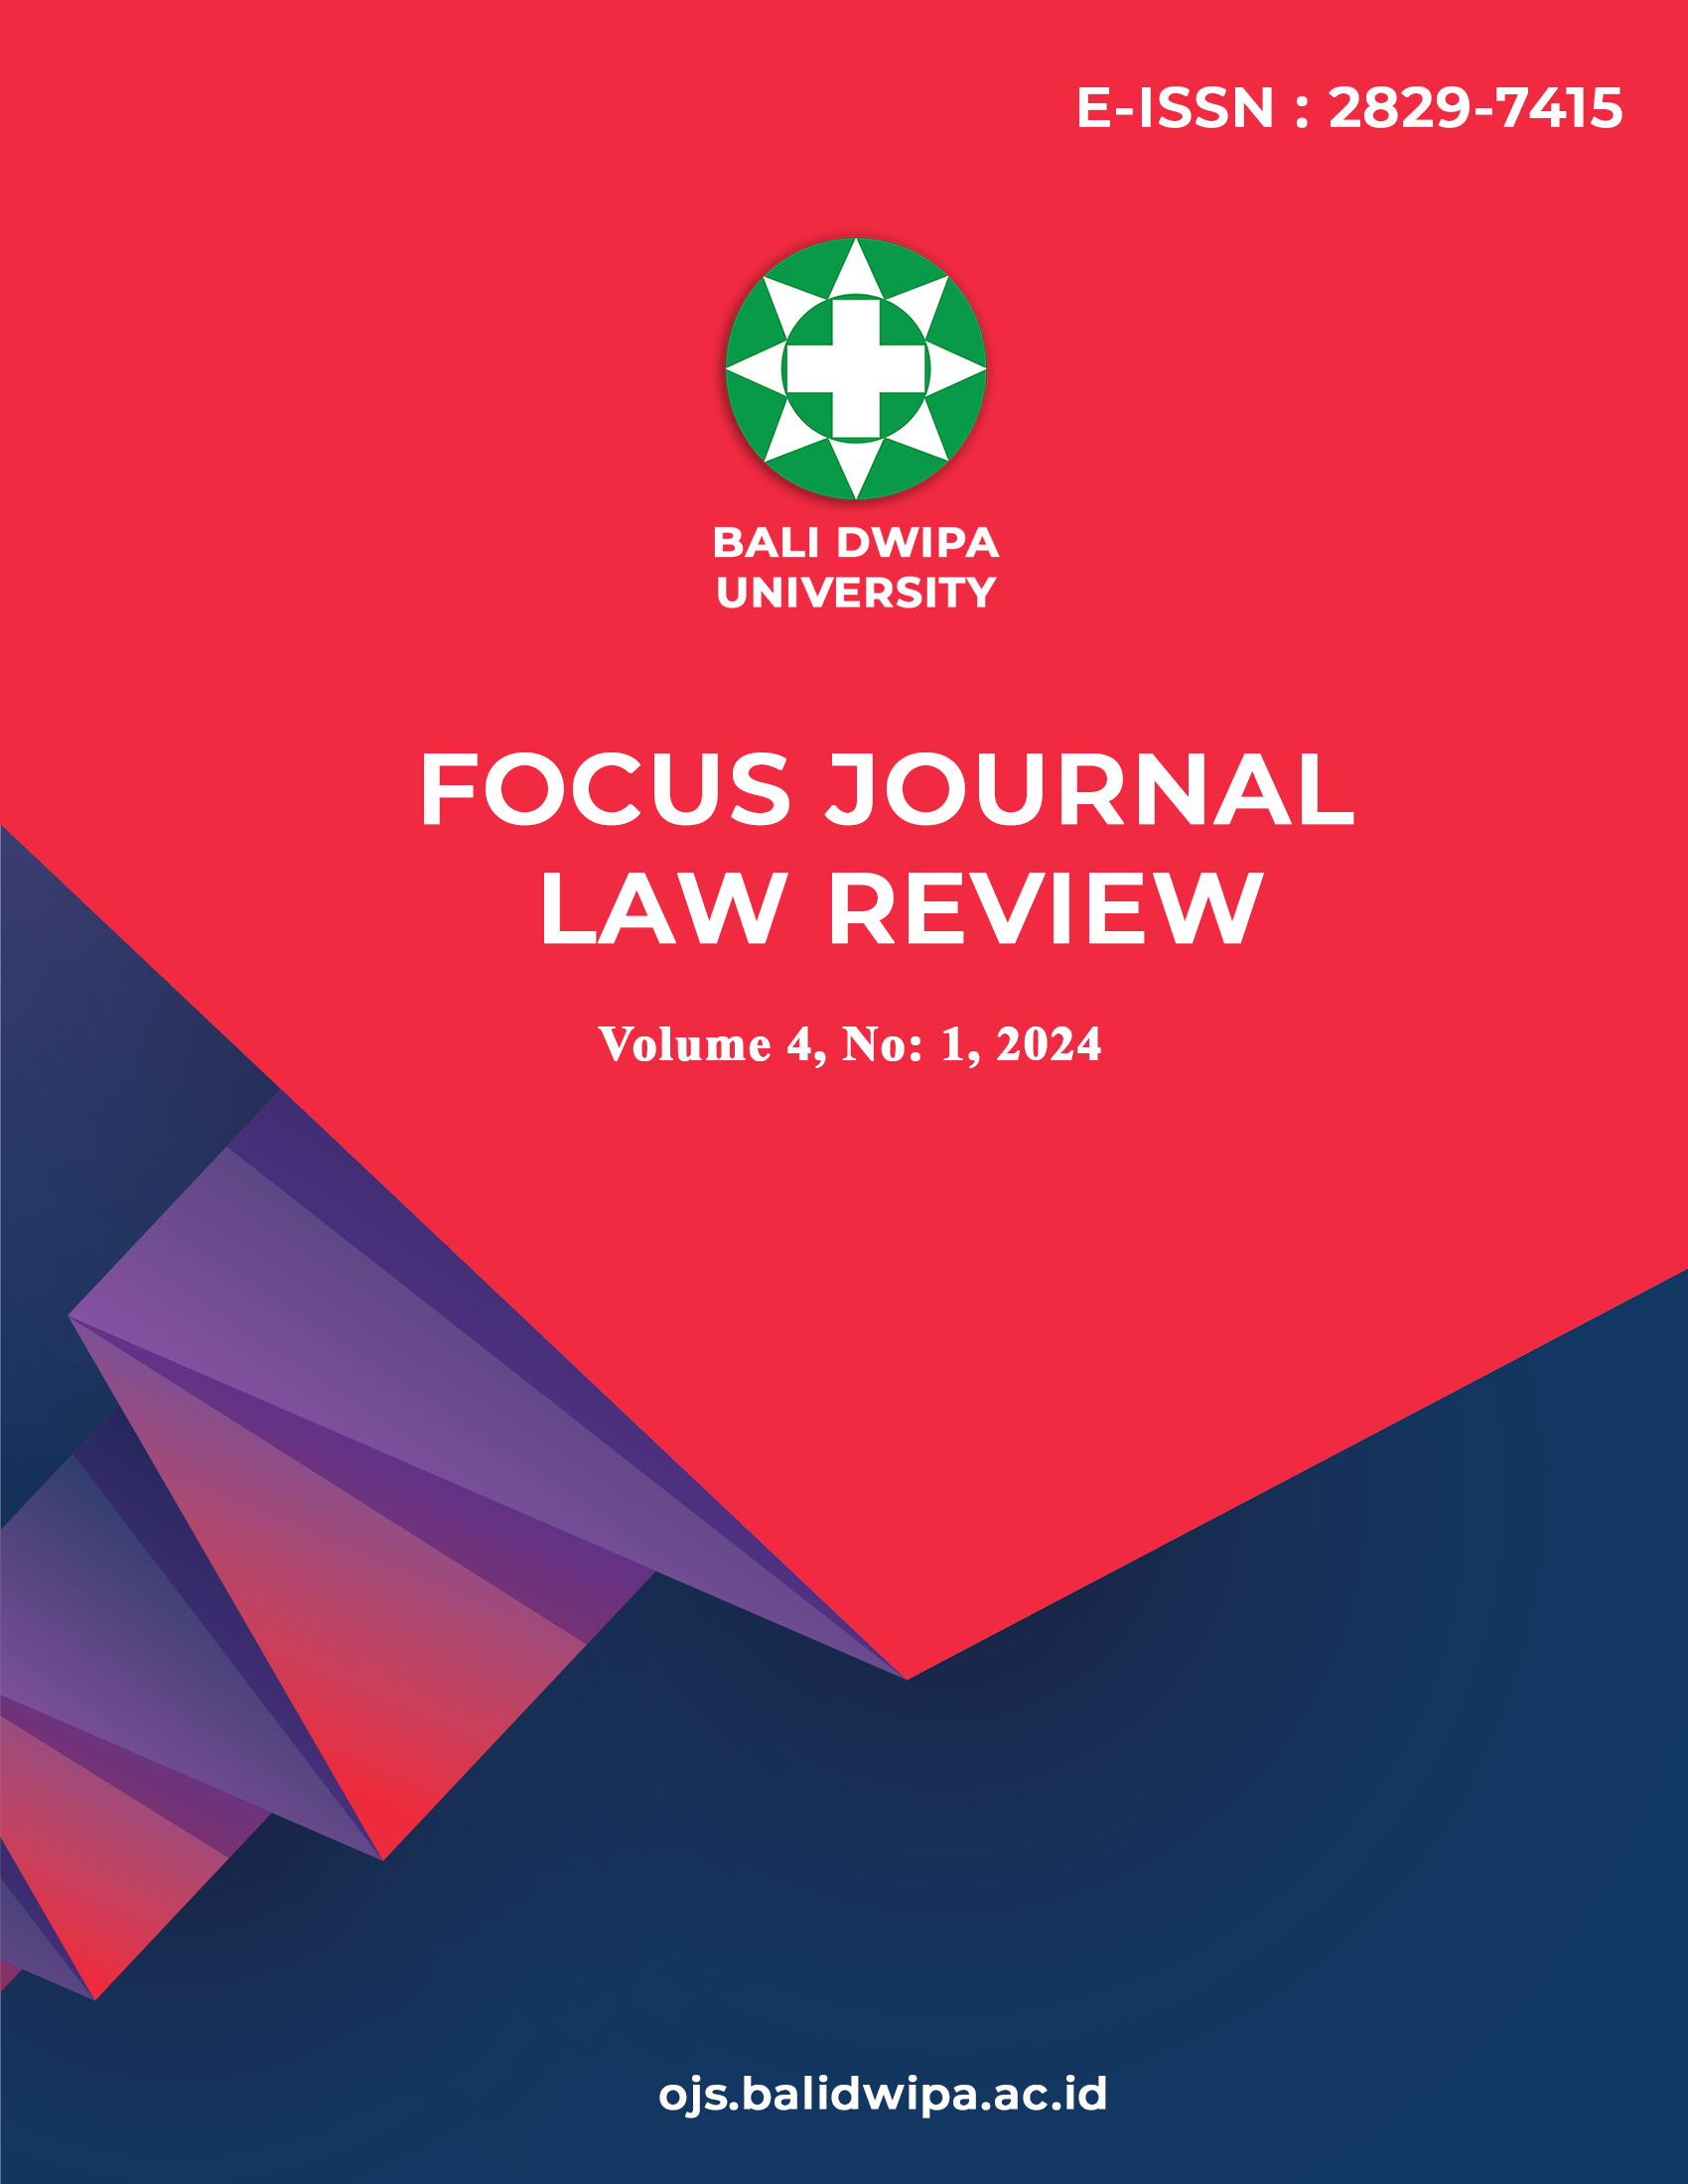 					View Vol. 4 No. 1 (2024): Focus Journal Law Review (Author: Japan, Indonesia, Russia)
				